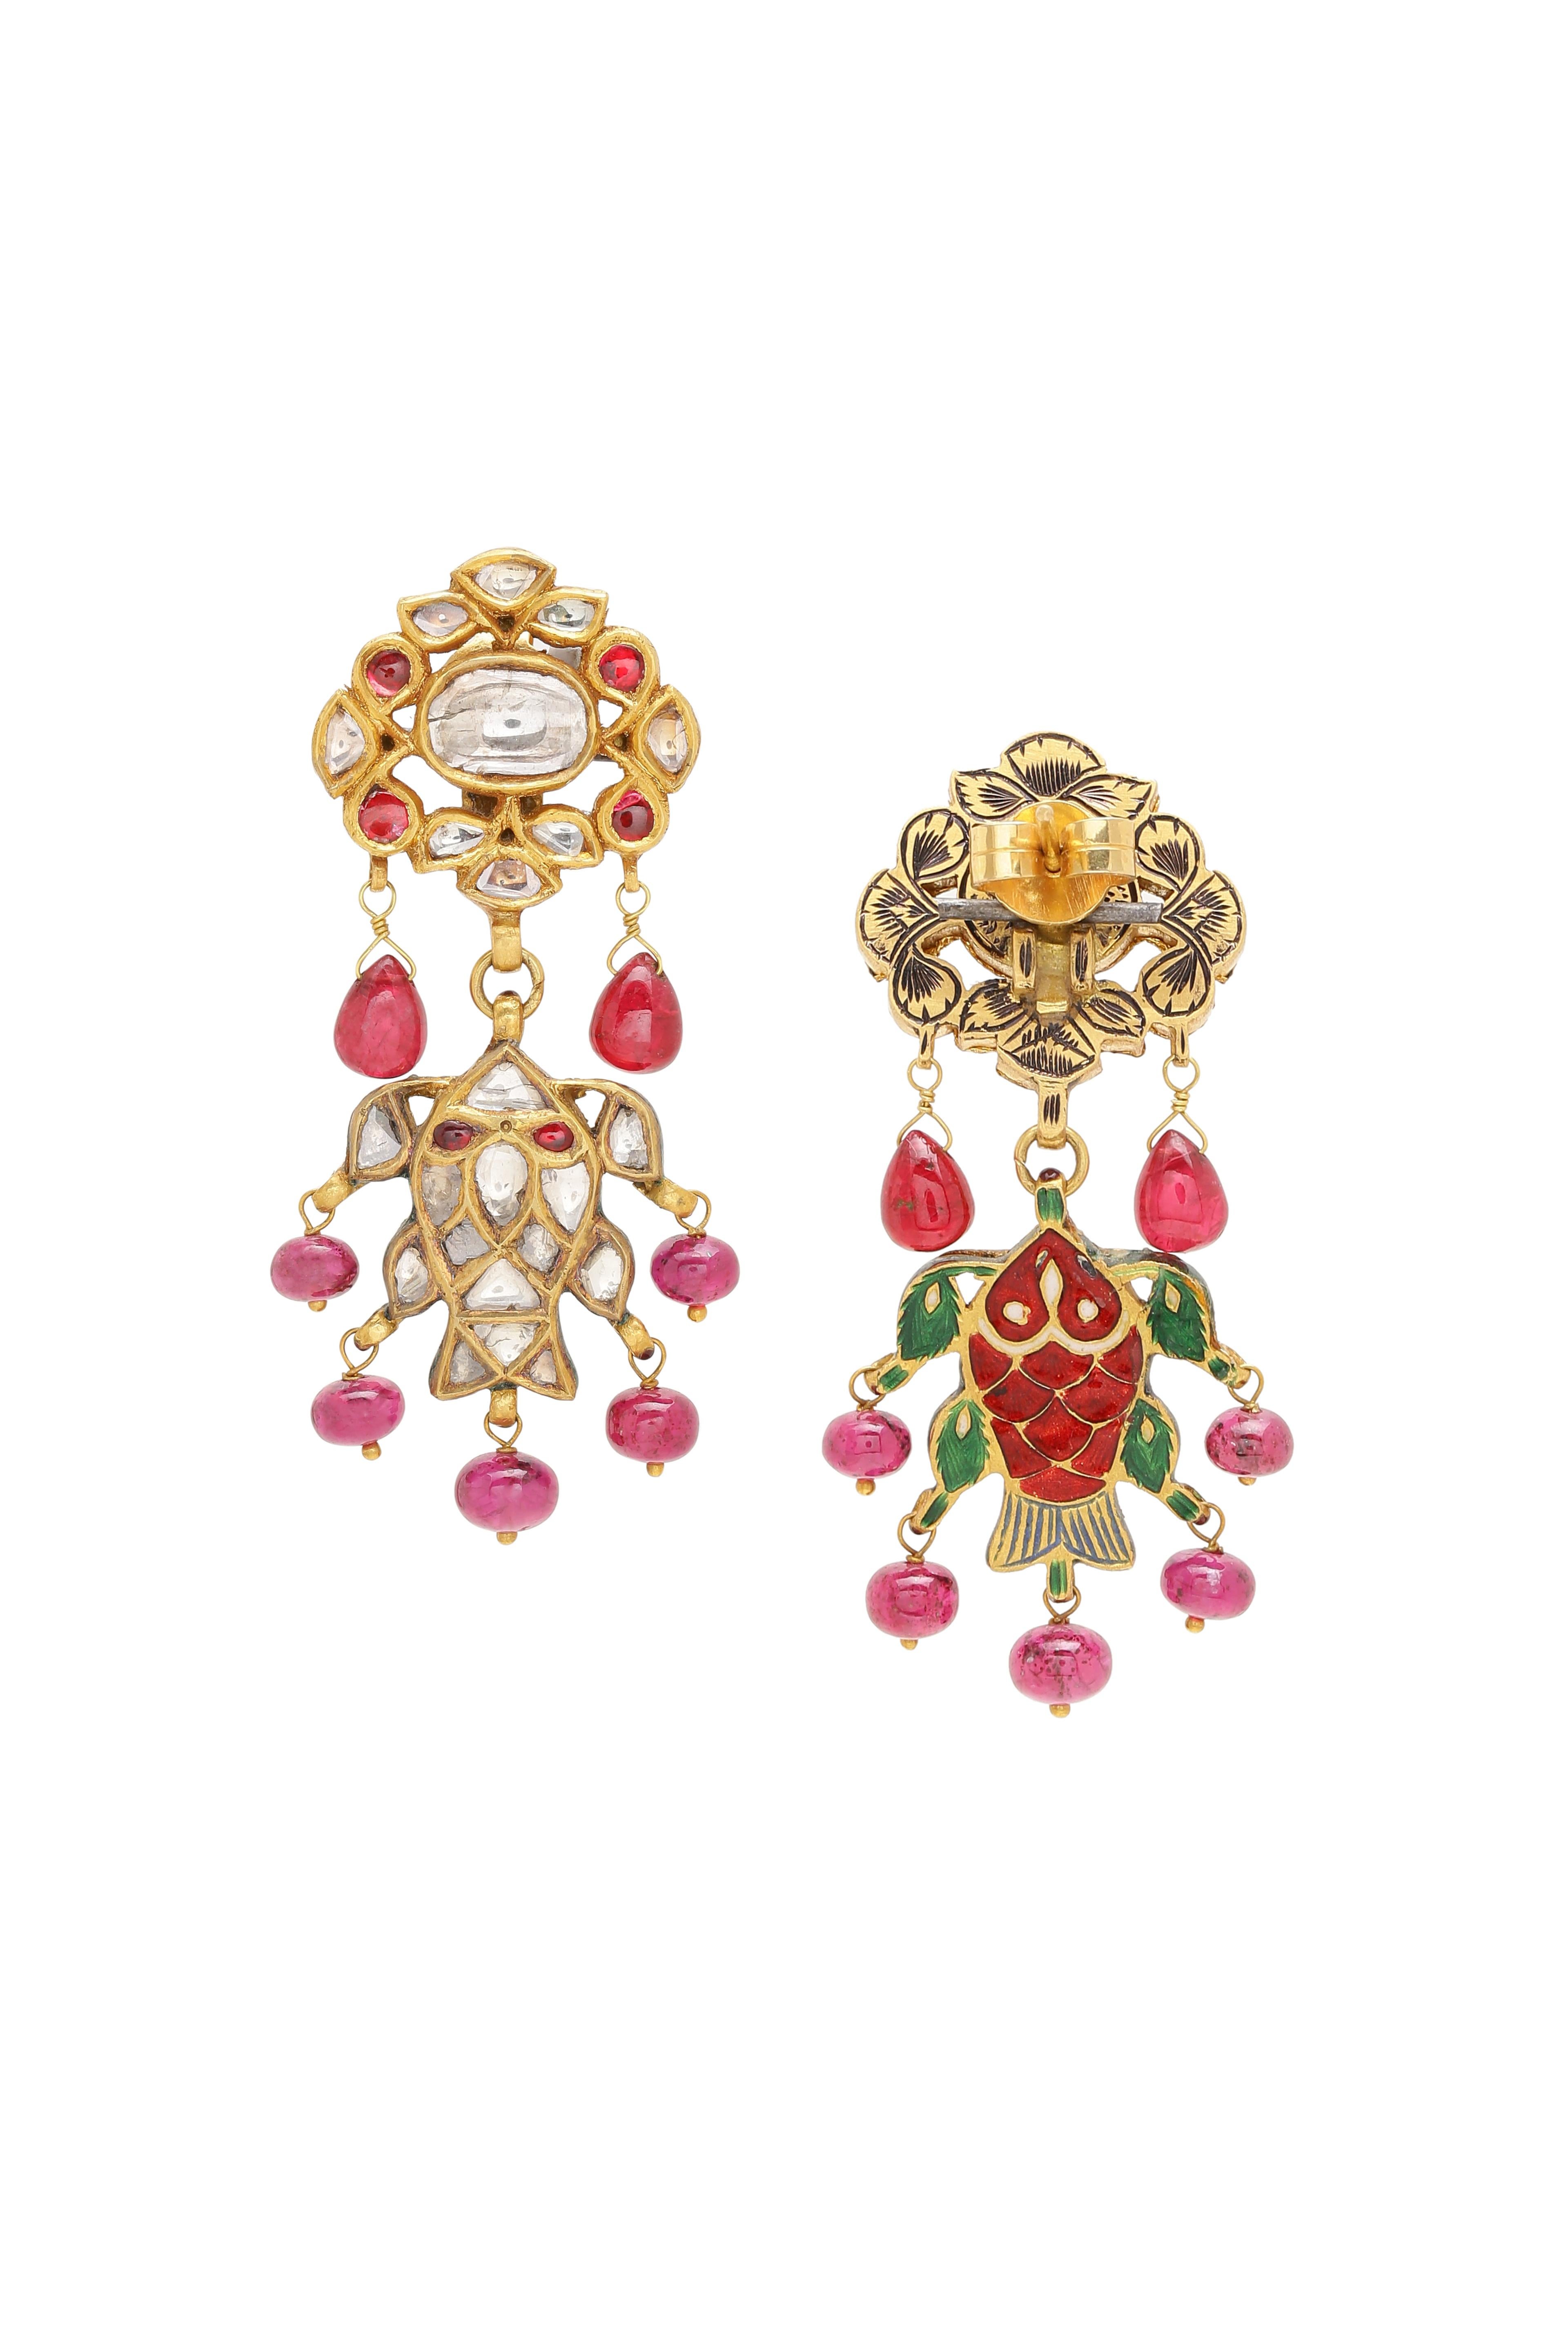 A Pair of beautiful Fish Earrings with good quality flat Rose Cut Diamonds. You will notice some Rubies set on the top part of the earring. The earring has drops and beads of Spinel hanging in 18K Gold Wire. The whole piece is handcrafted in 18K